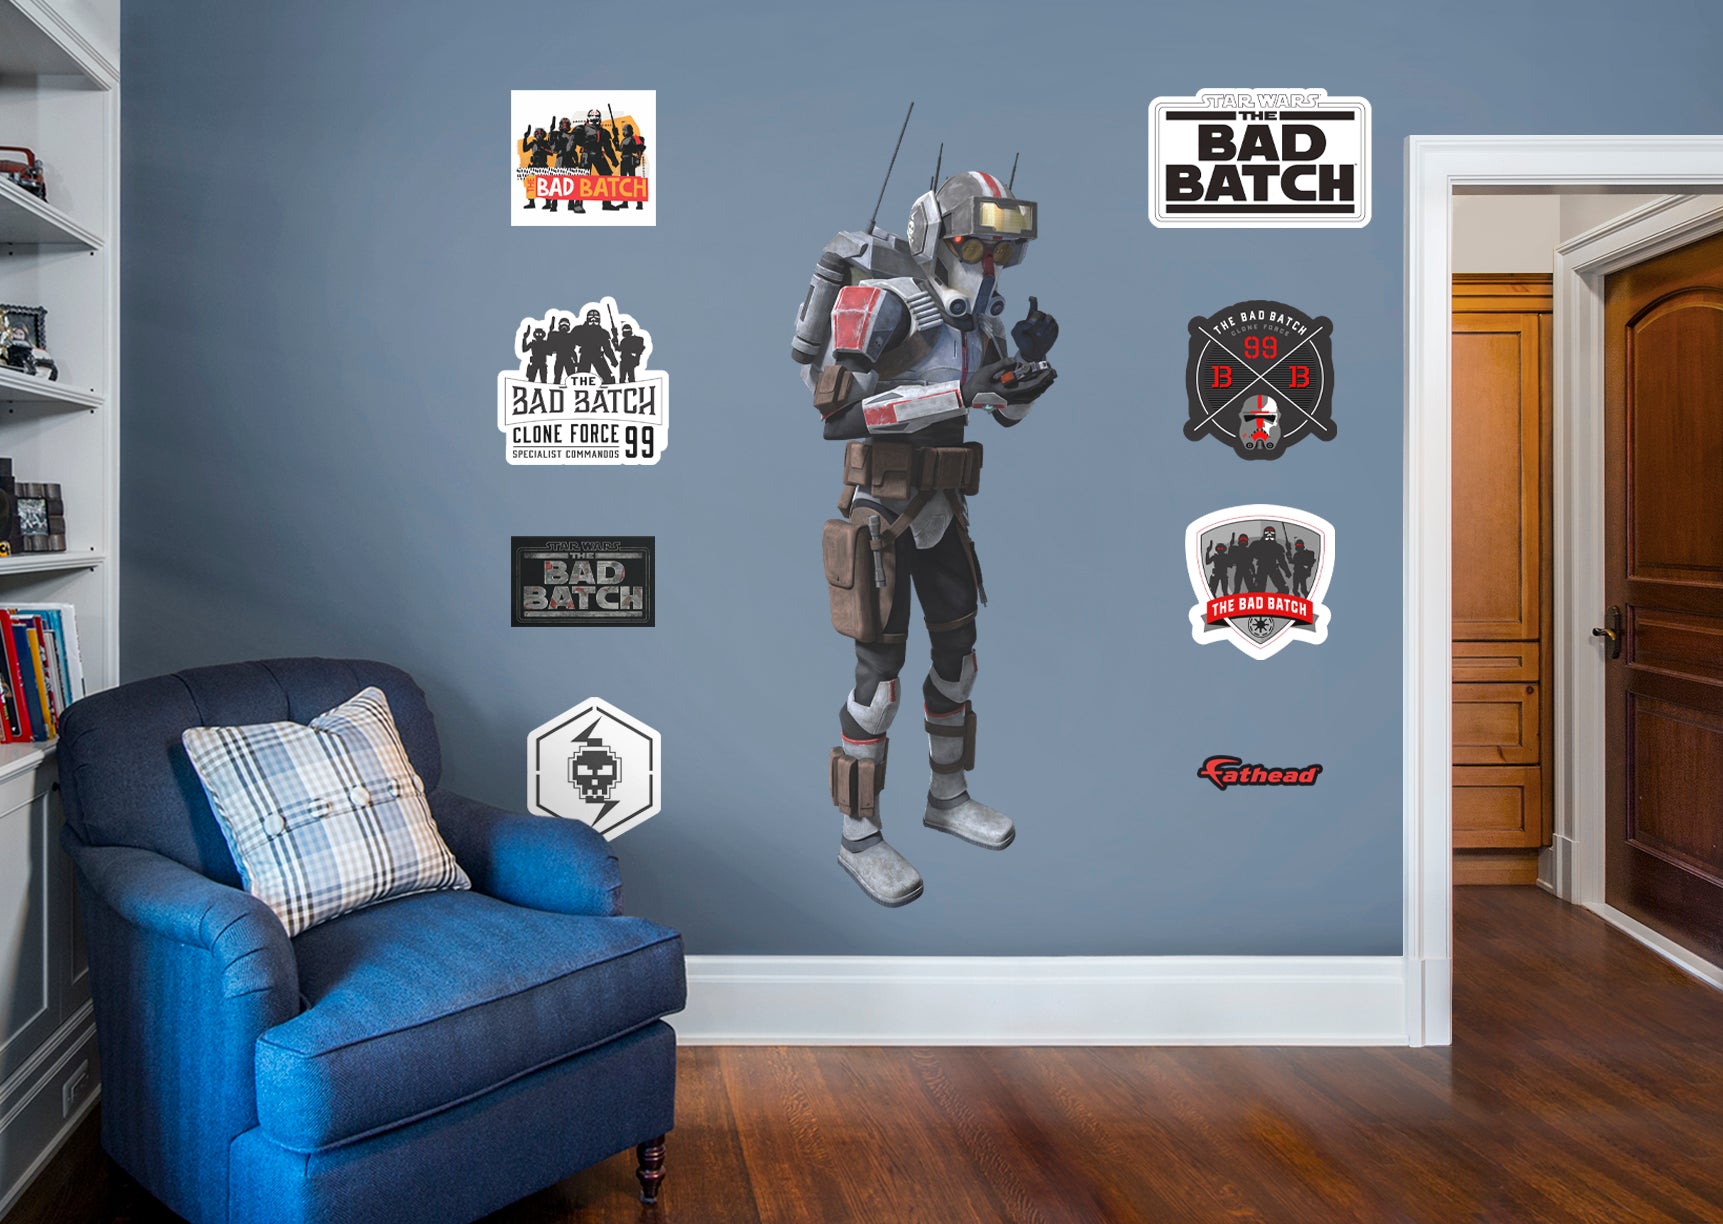 Bad Batch Tech - Officially Licensed Star Wars Removable Wall Decal Large by Fathead | Vinyl